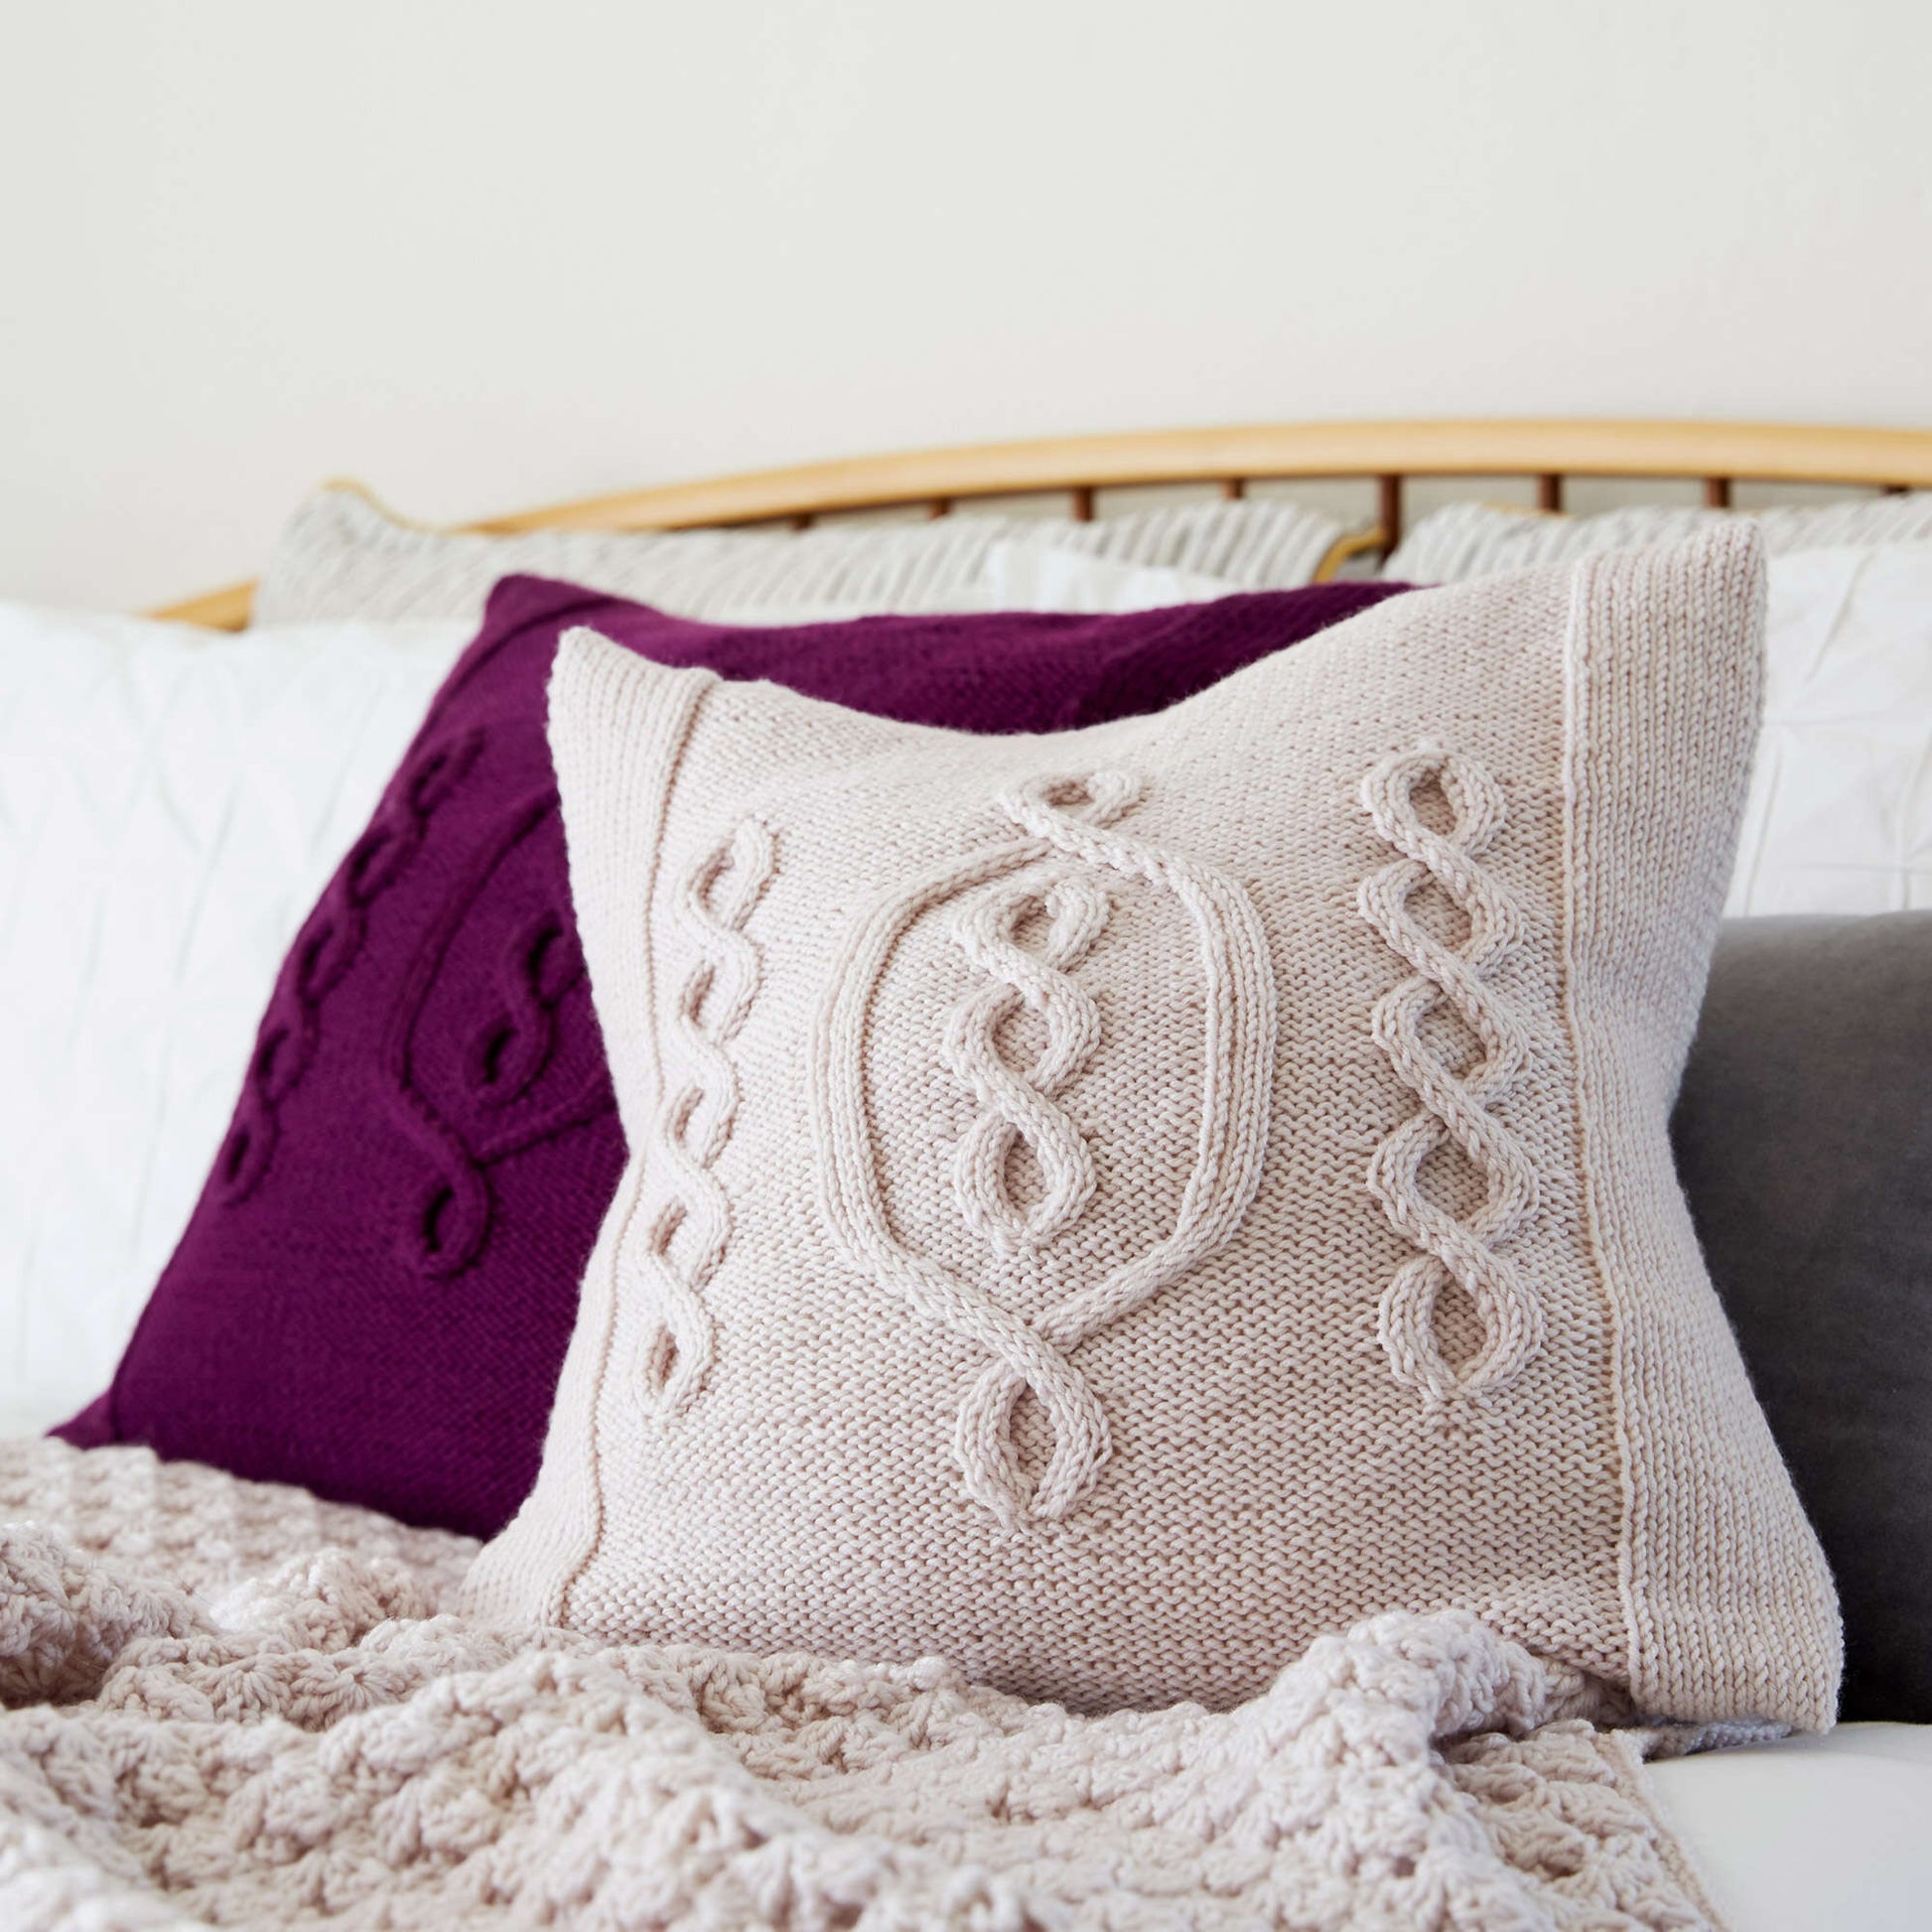 Free Red Heart Hygge Chic Throw Crochet Pattern